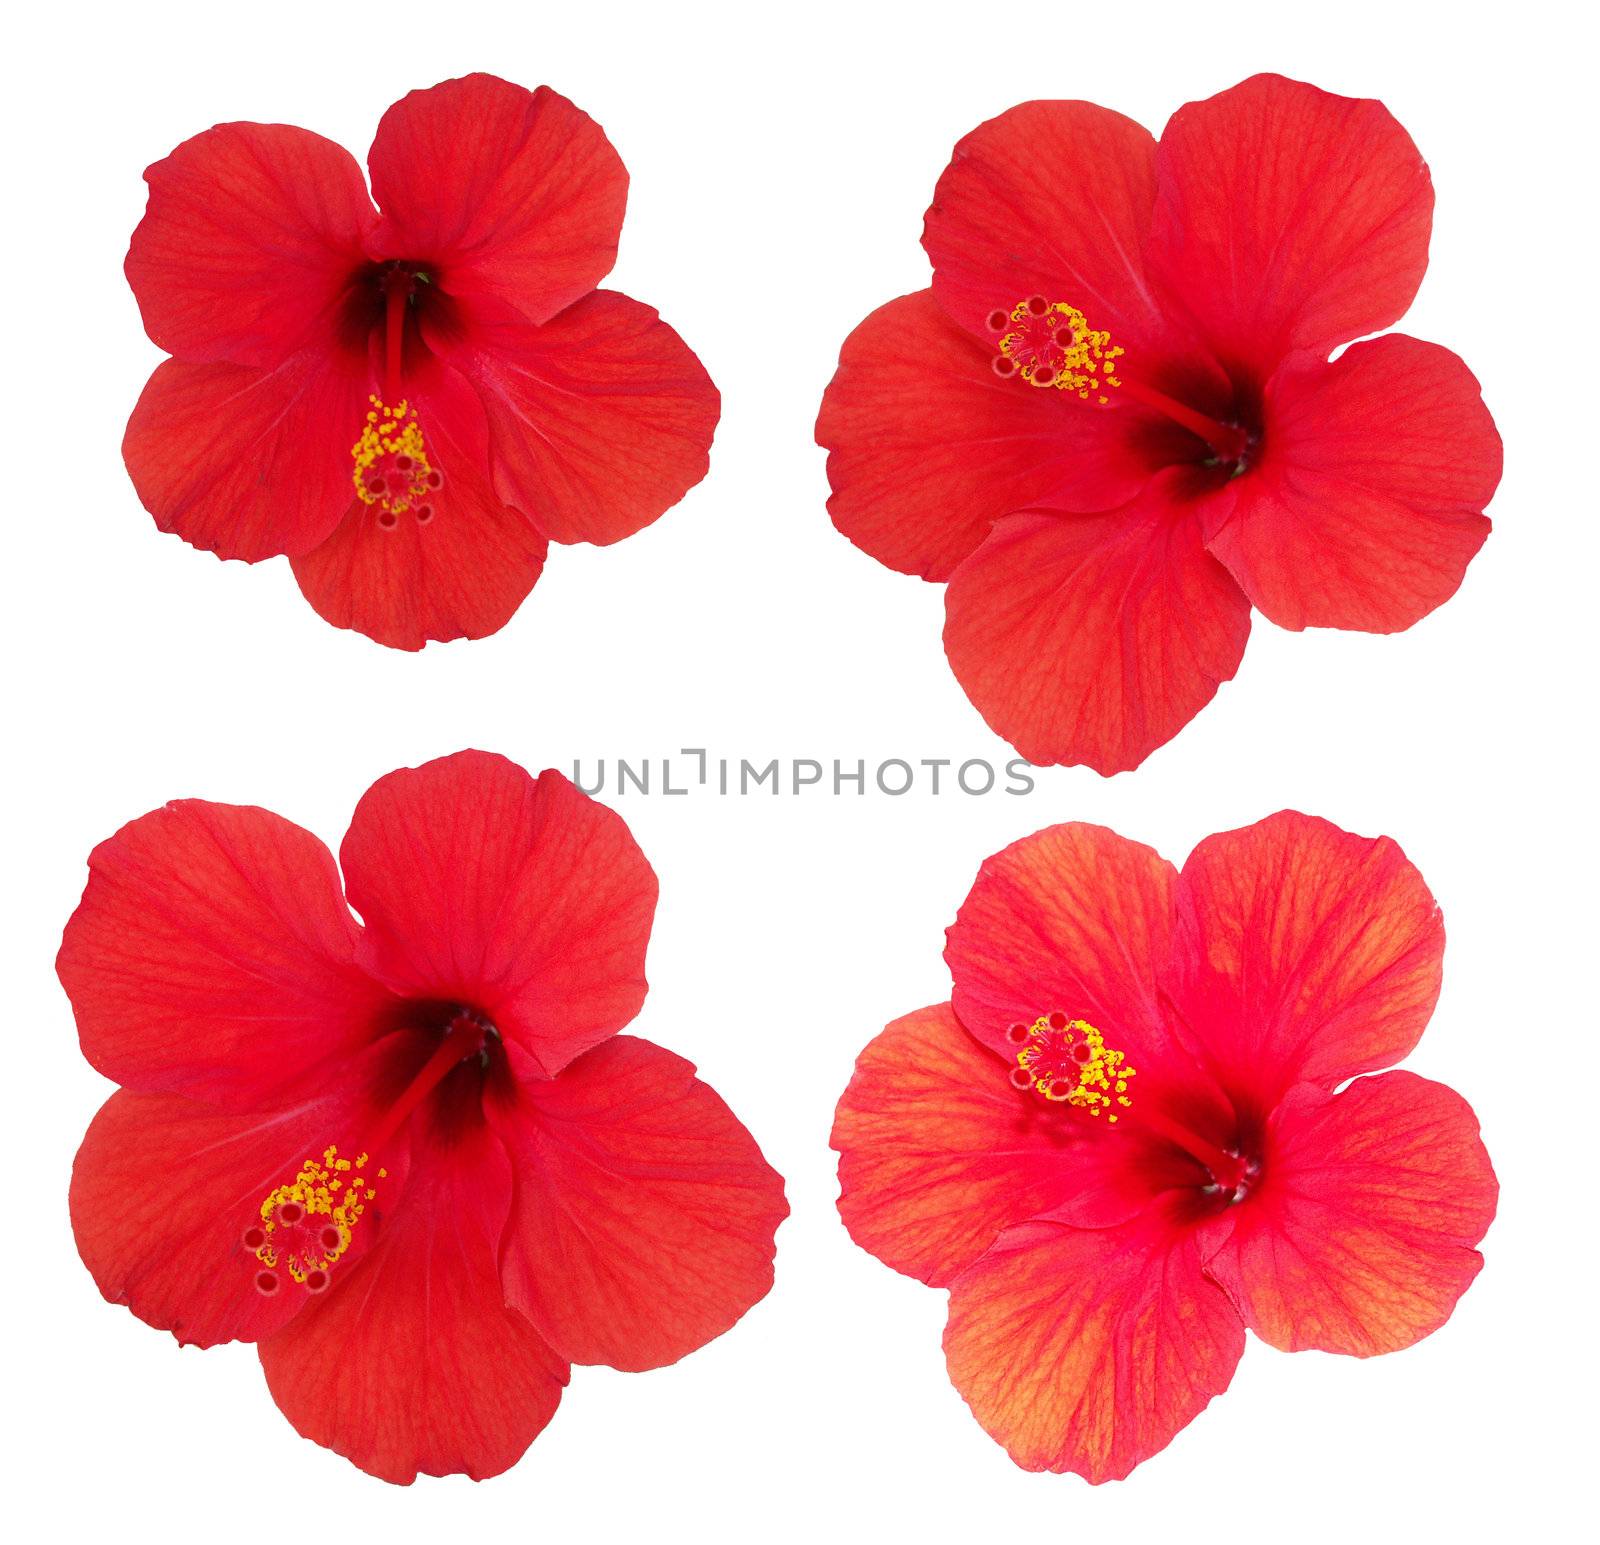 The isolated image of four flowers of hibiscus